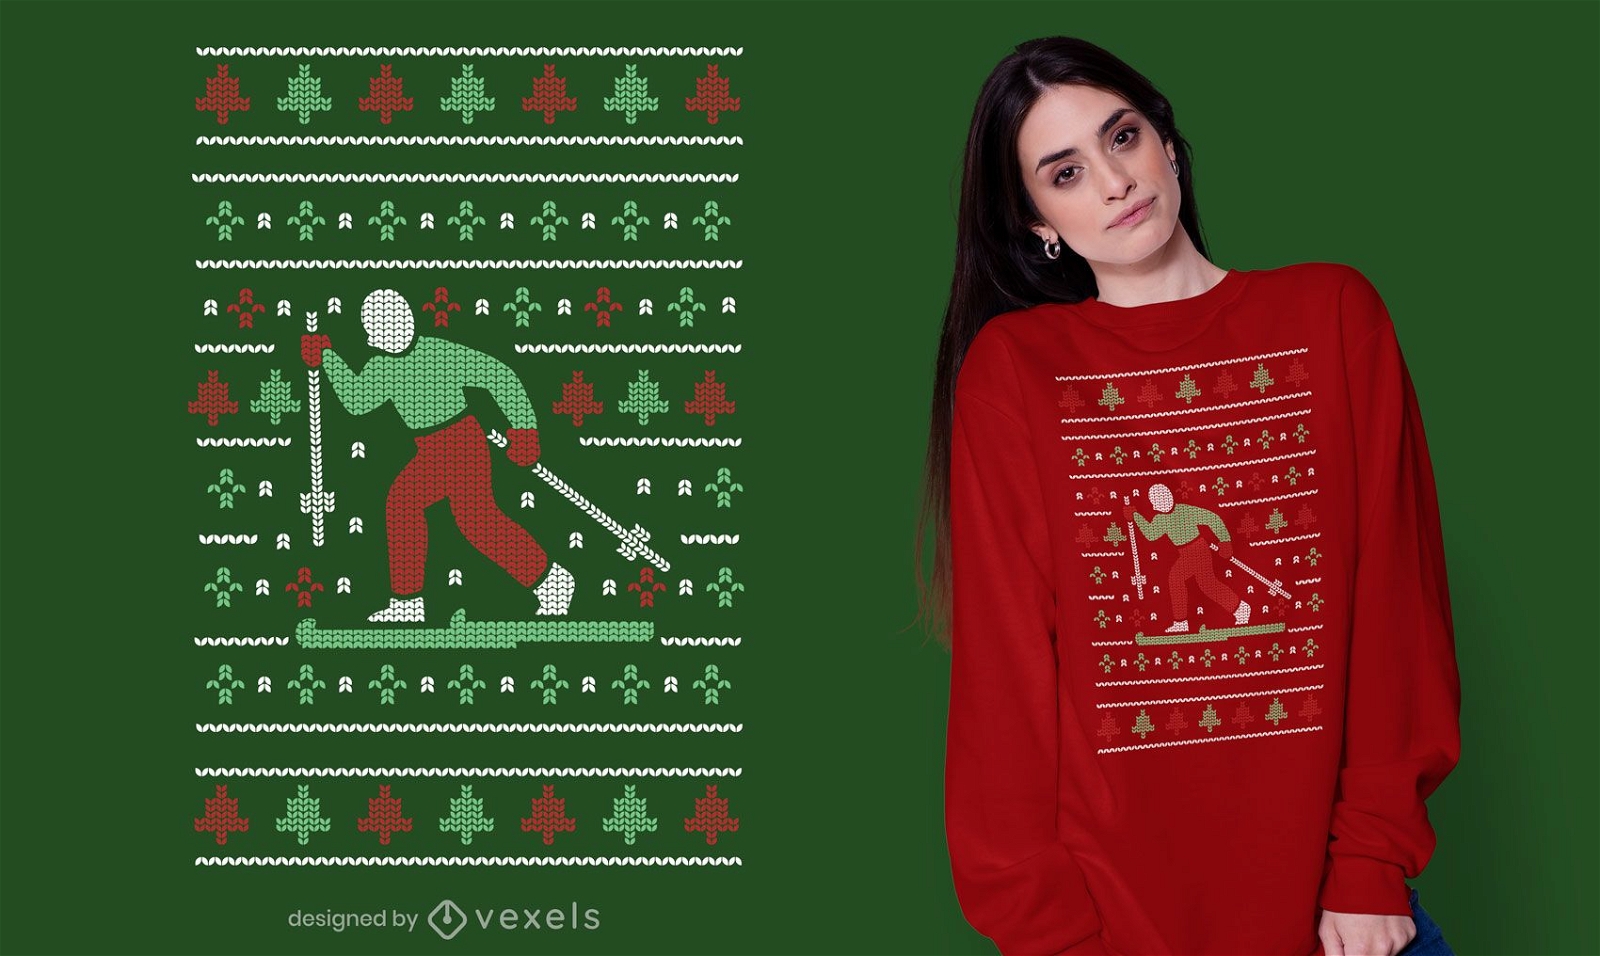 Ugly sweater skiing t-shirt design